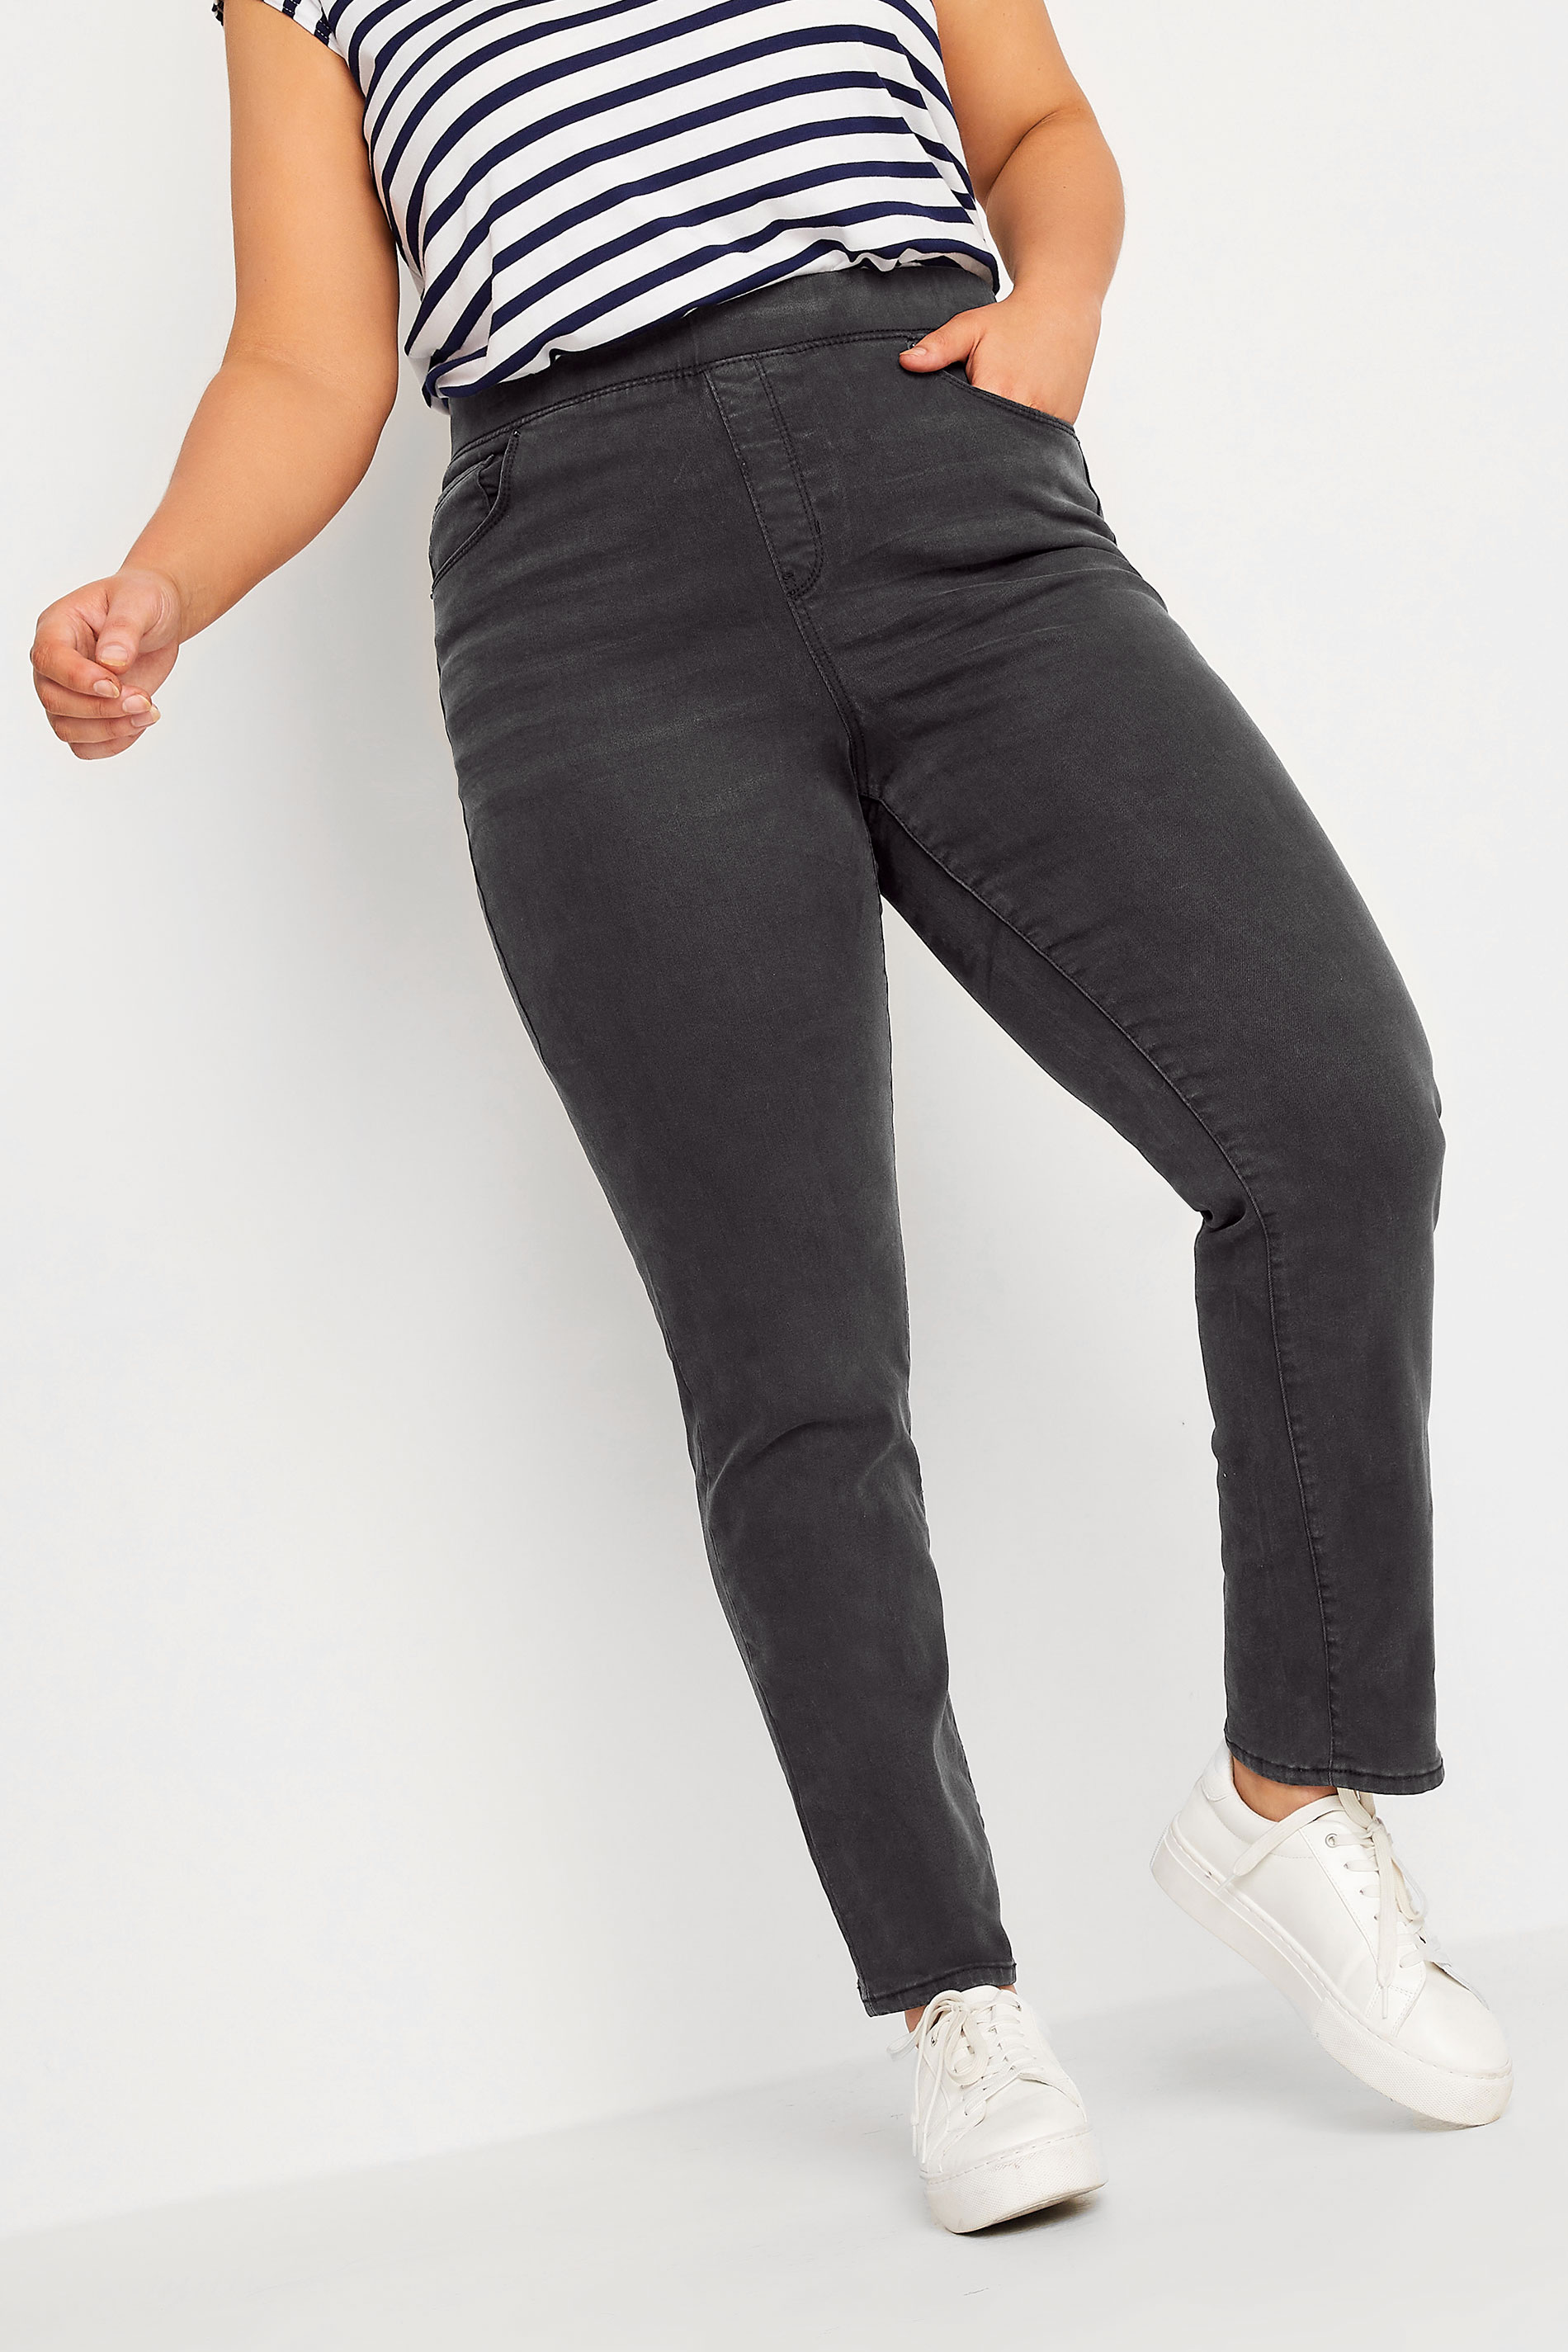 YOURS Curve Plus Size Black Low Rise Jeggings | Yours Clothing  1